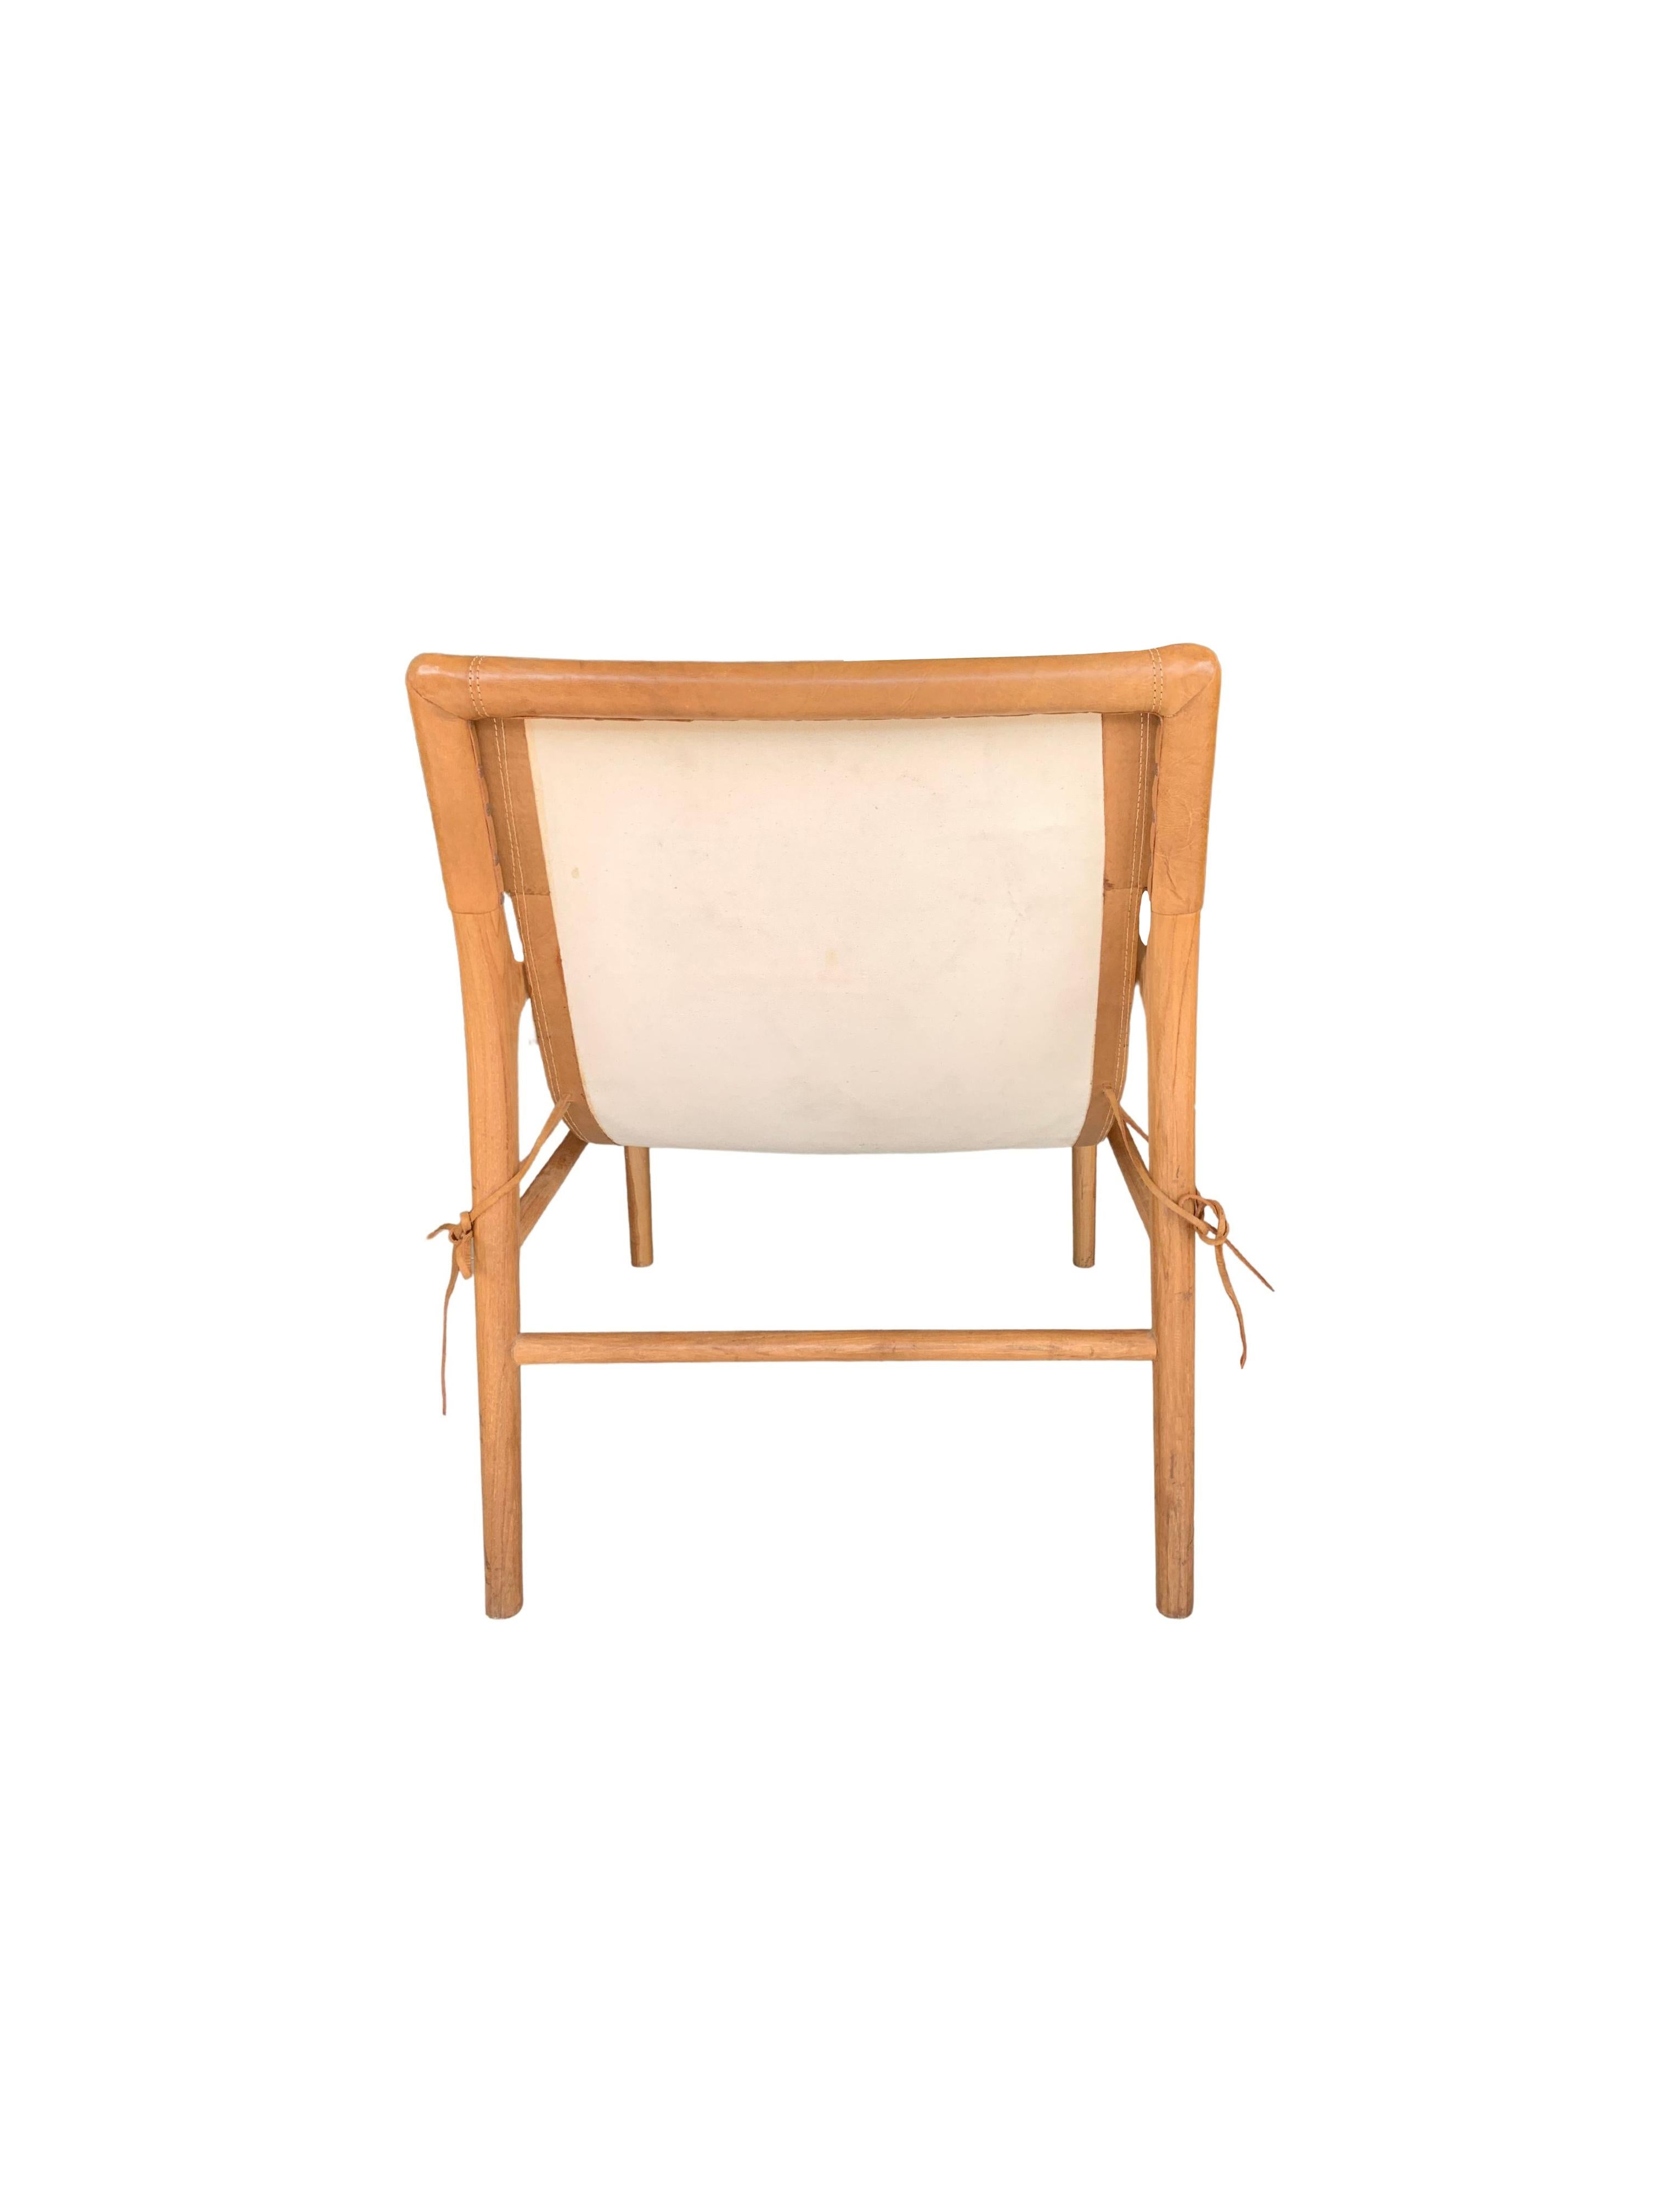 Modern Teak Wood Framed Lounge Chair, with Hanging Leather Seat